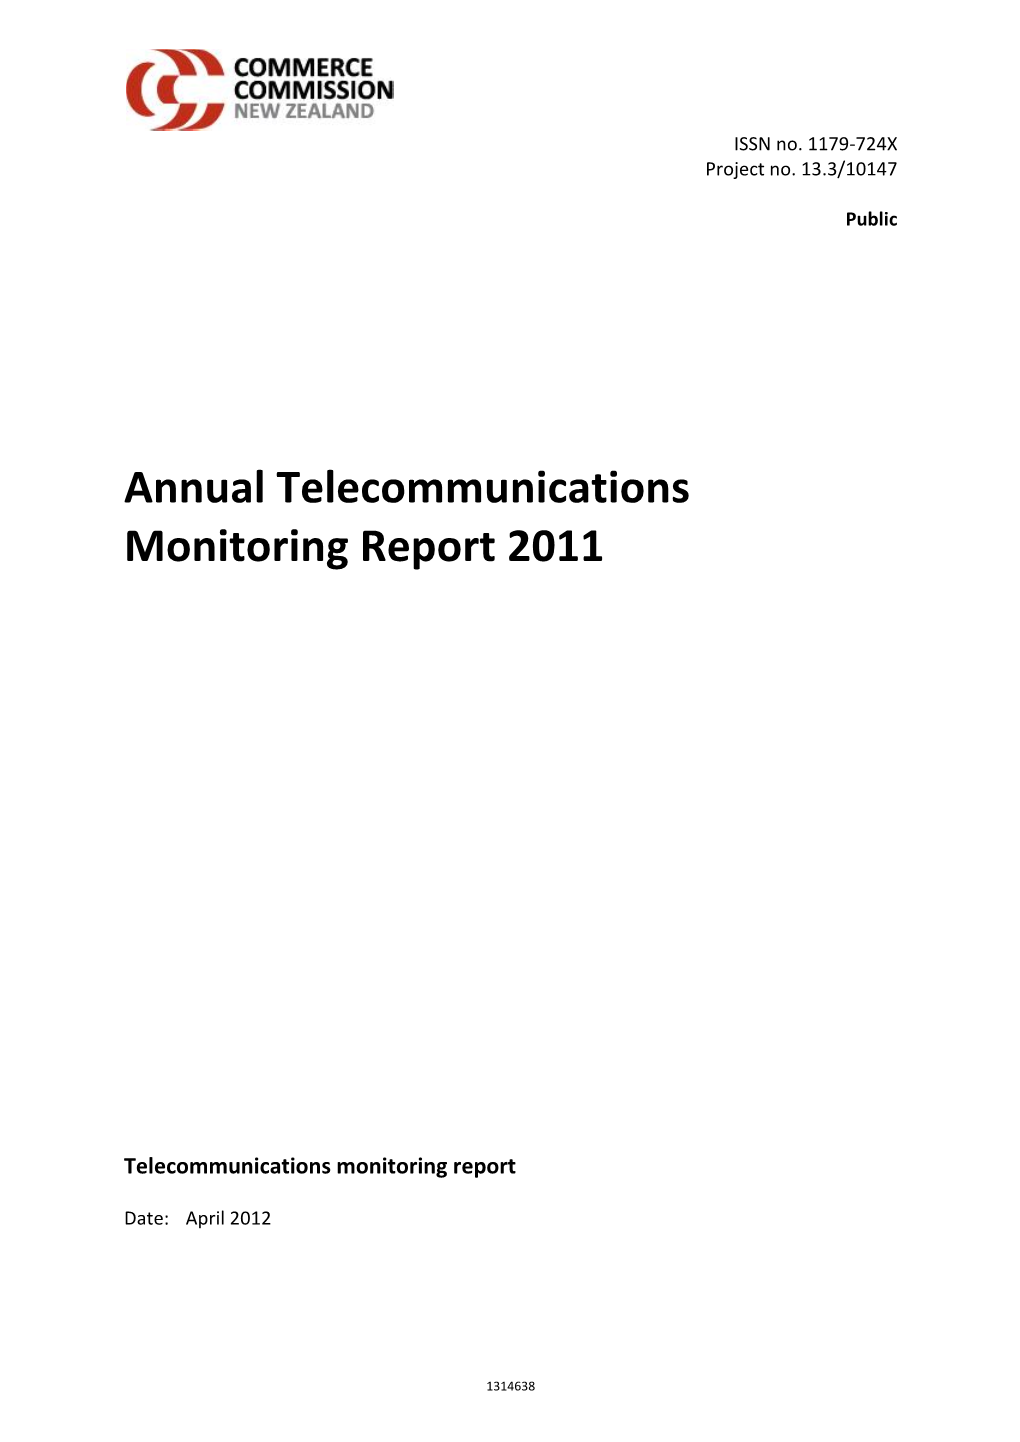 Annual Telecommunications Monitoring Report 2011